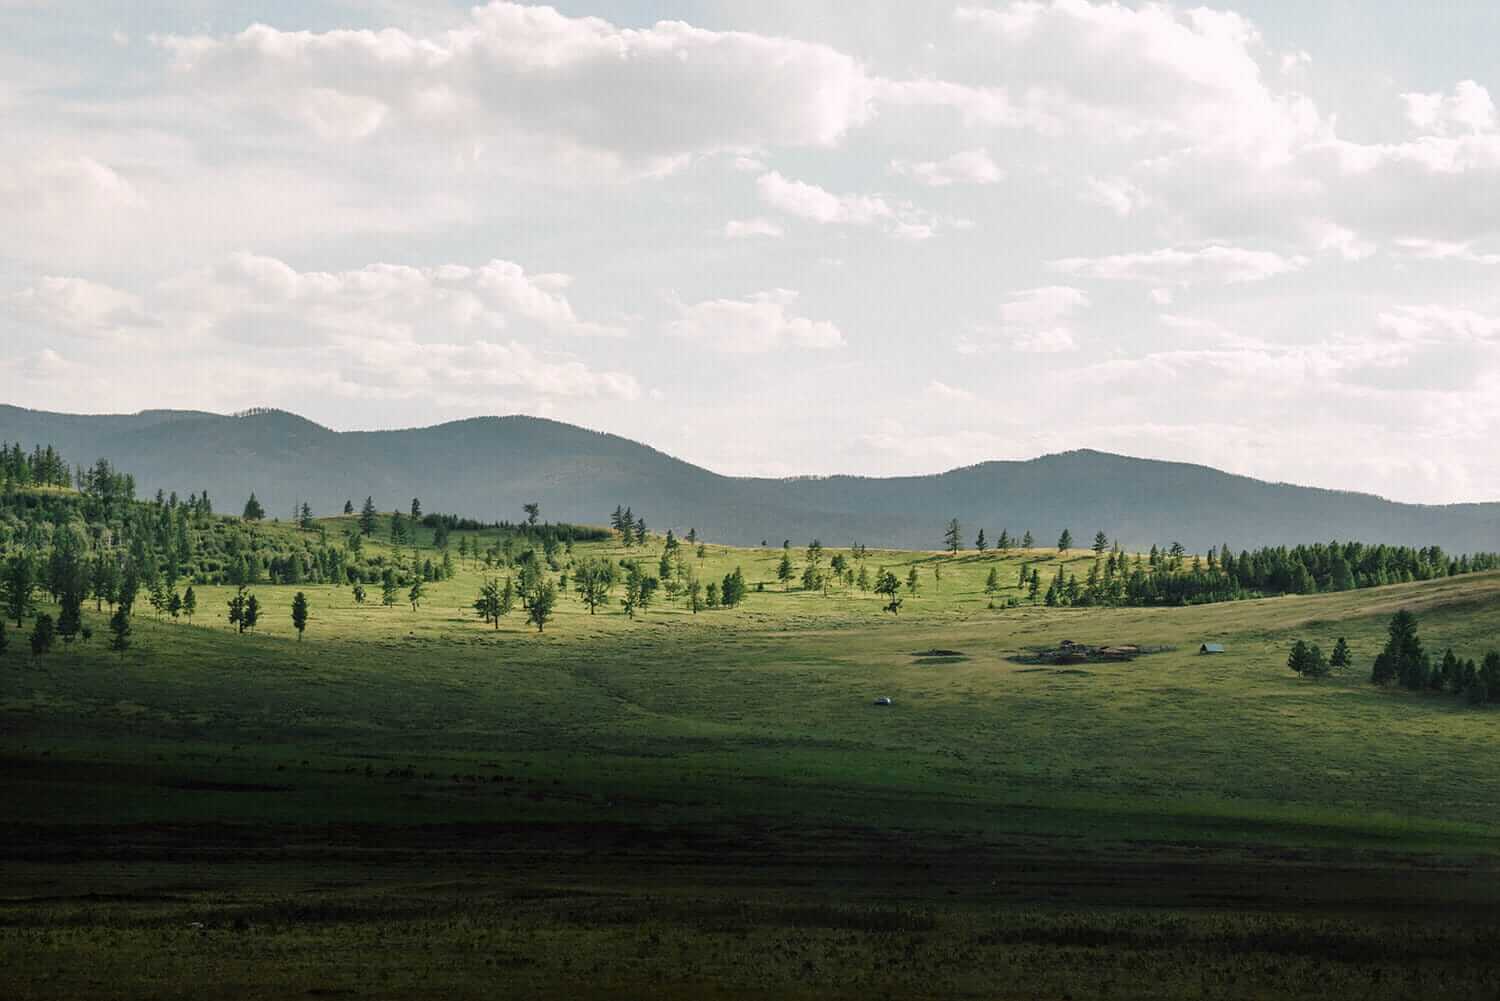 Central Mongolia